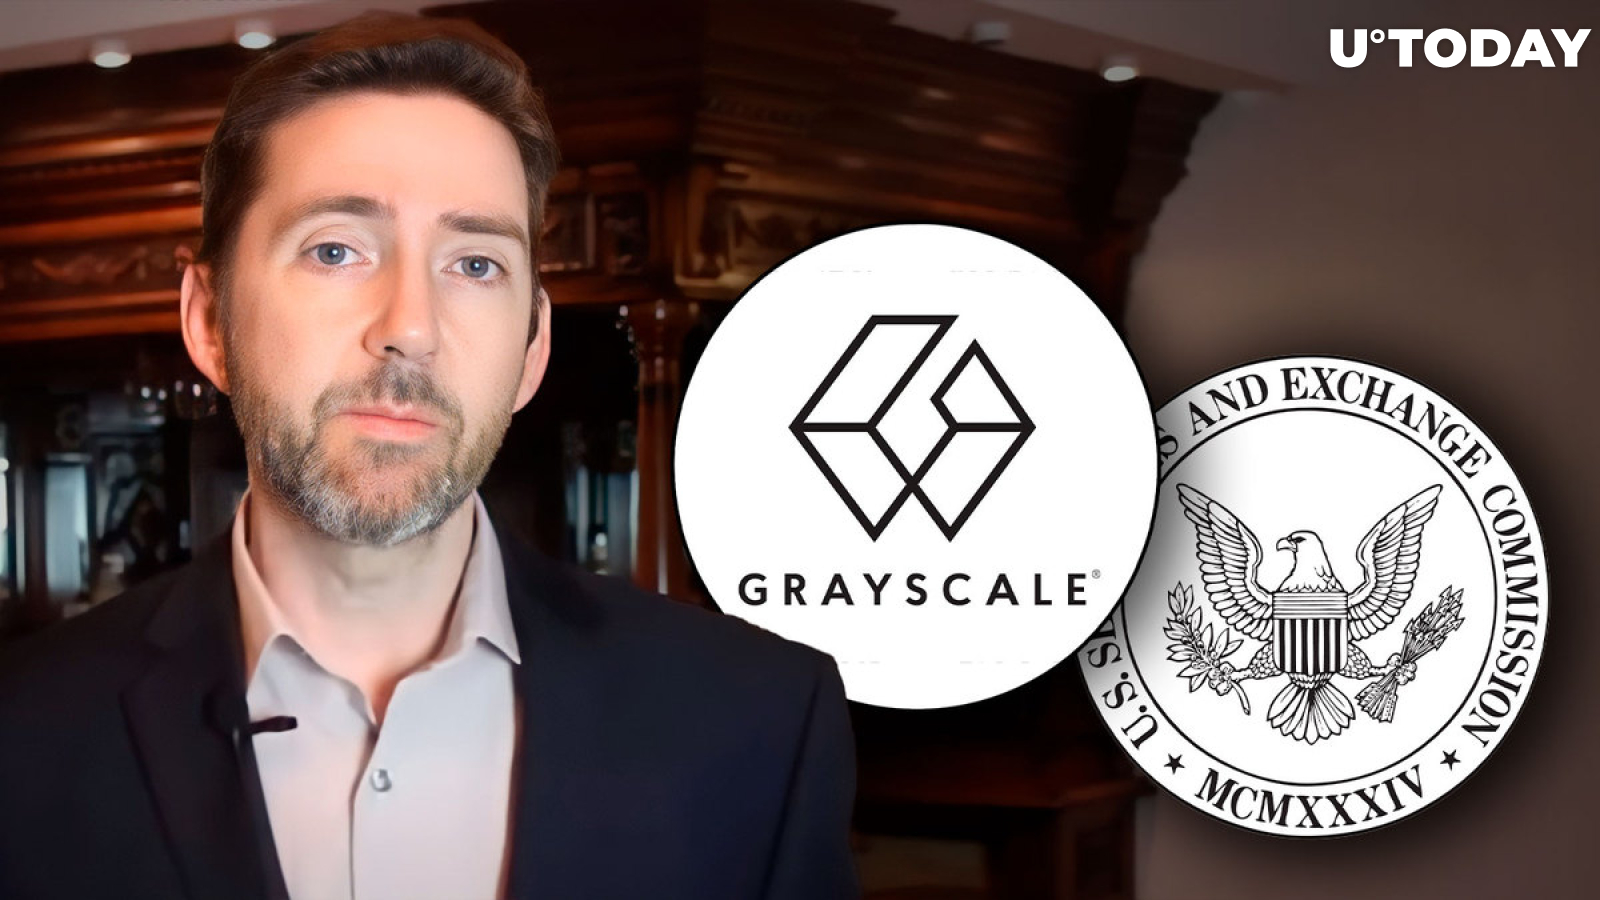 SEC Plans No Appealing on Lost Grayscale Case, Ripple Advocate Shares His Take